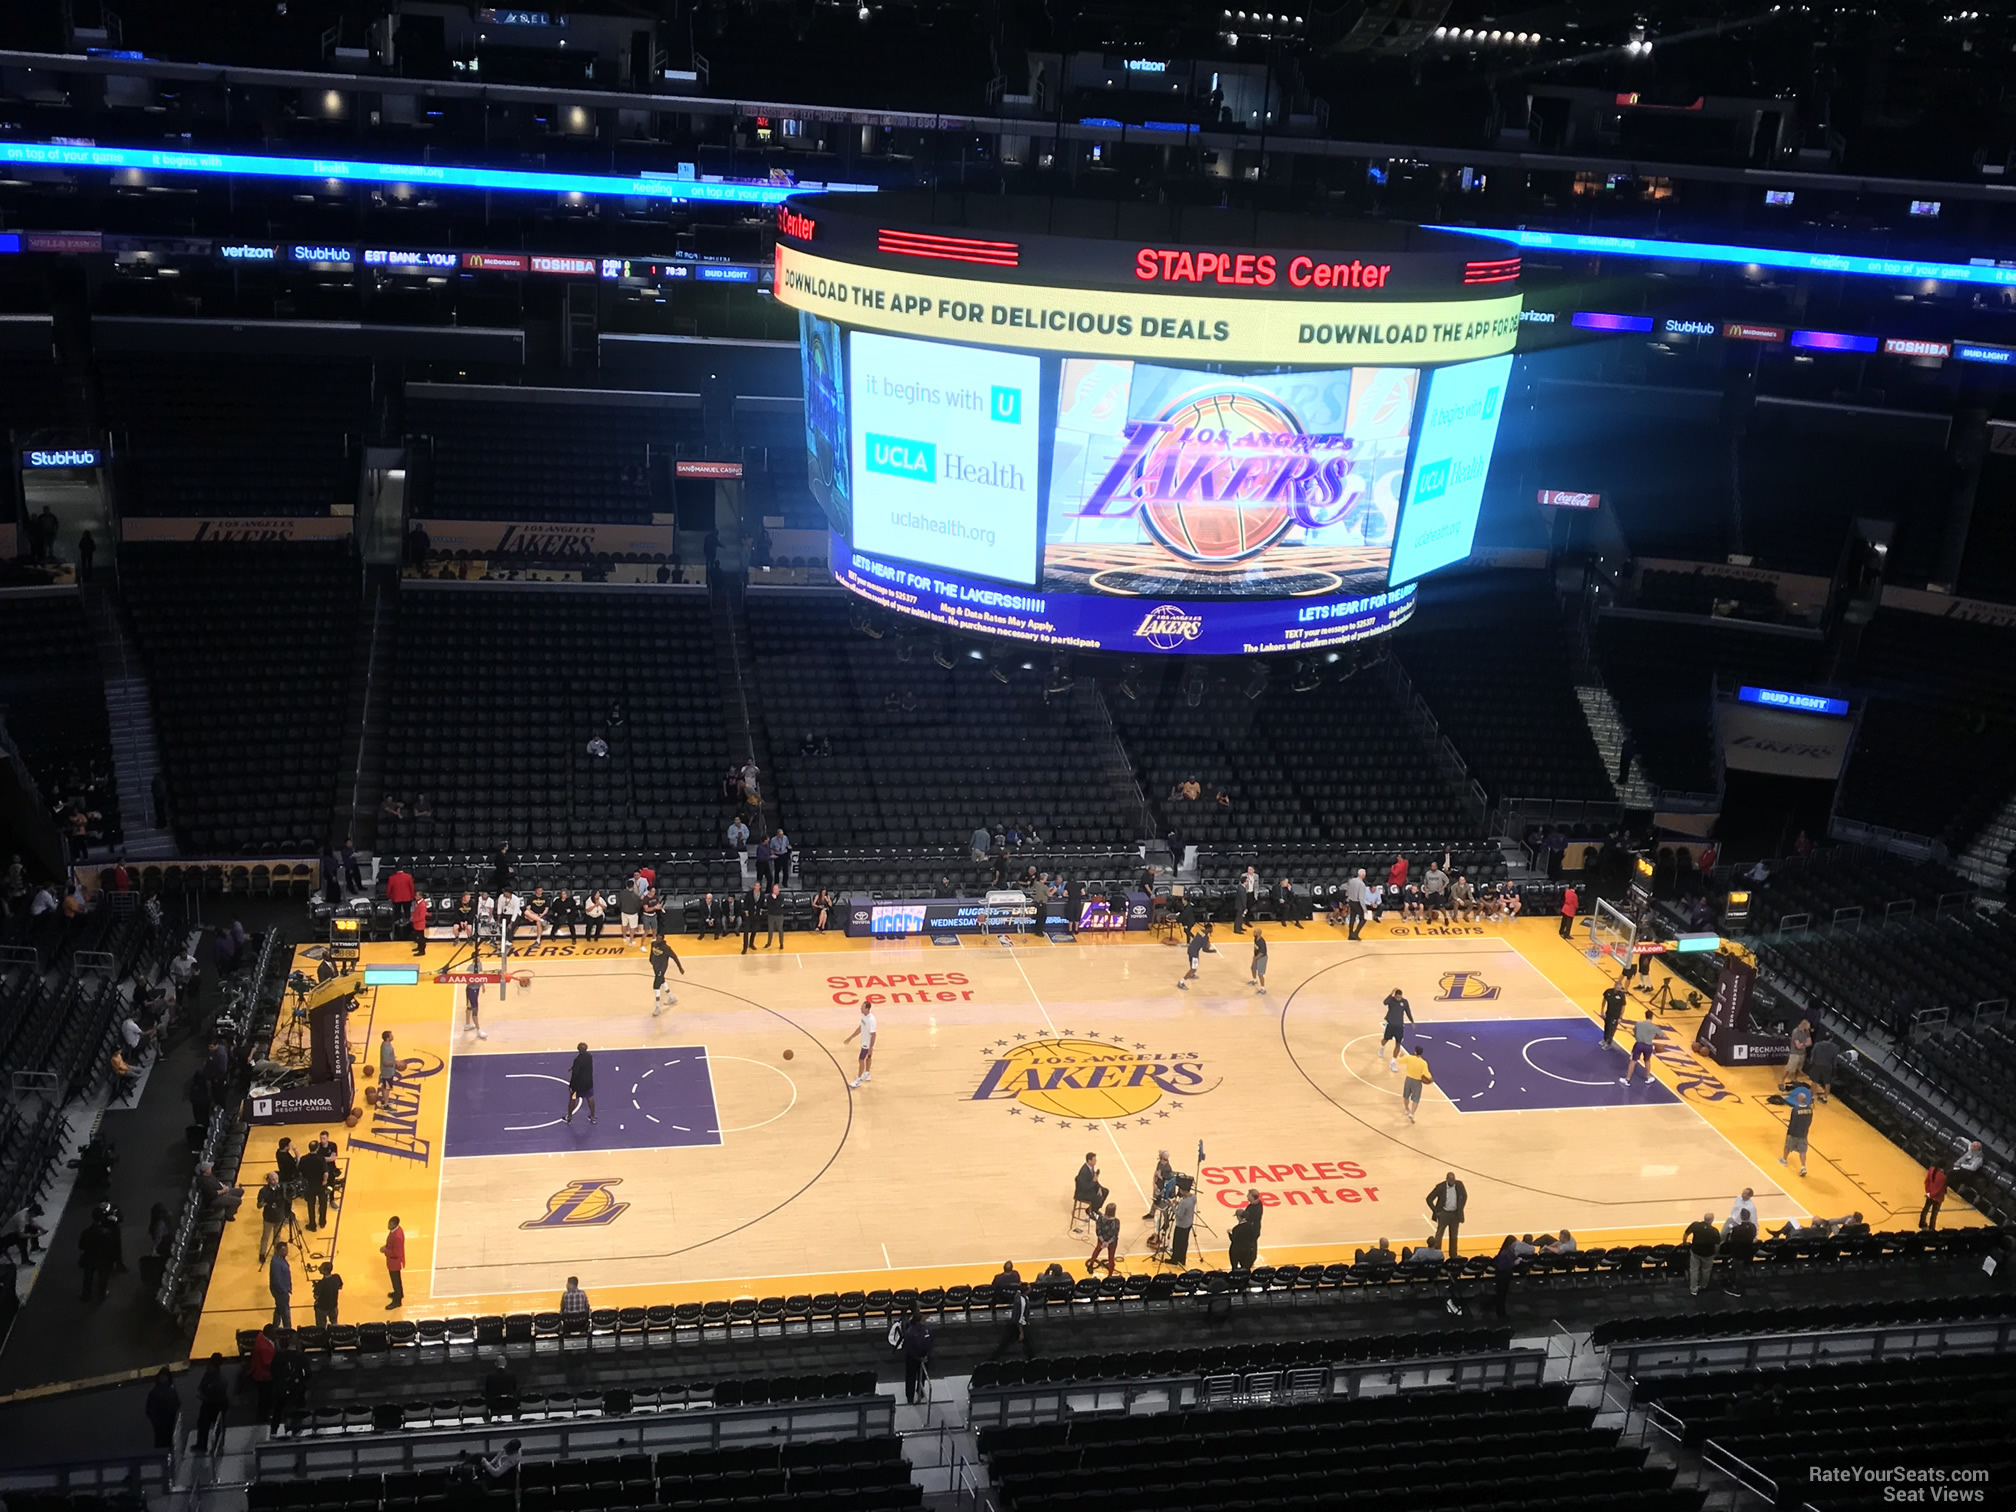 Staples Center Section 319 Clippers/Lakers RateYourSeats com